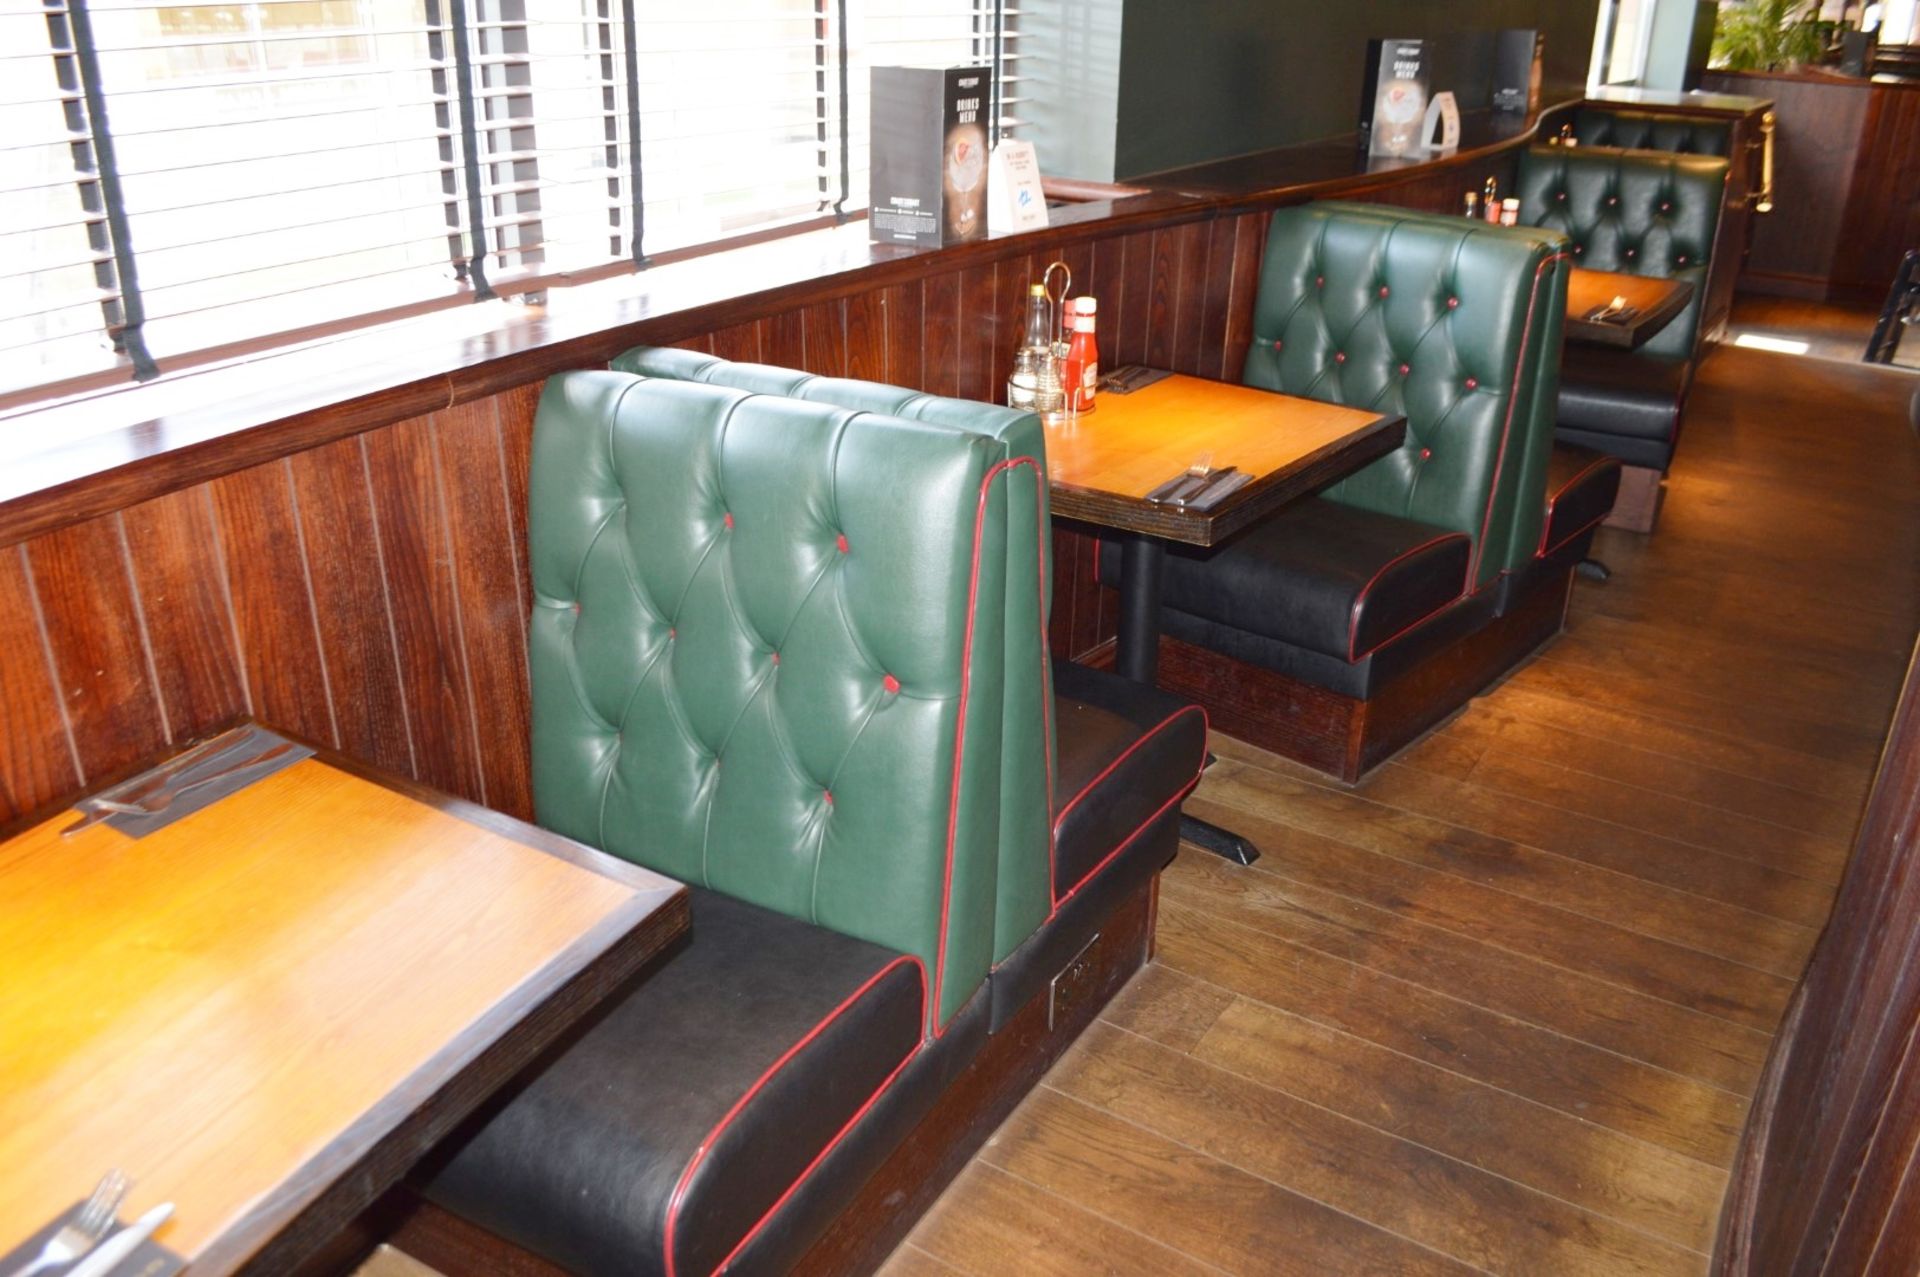 3 x Sections of Restaurant Booth Seating - Include 2 x Single Seats and 1 x Single Back to Back Seat